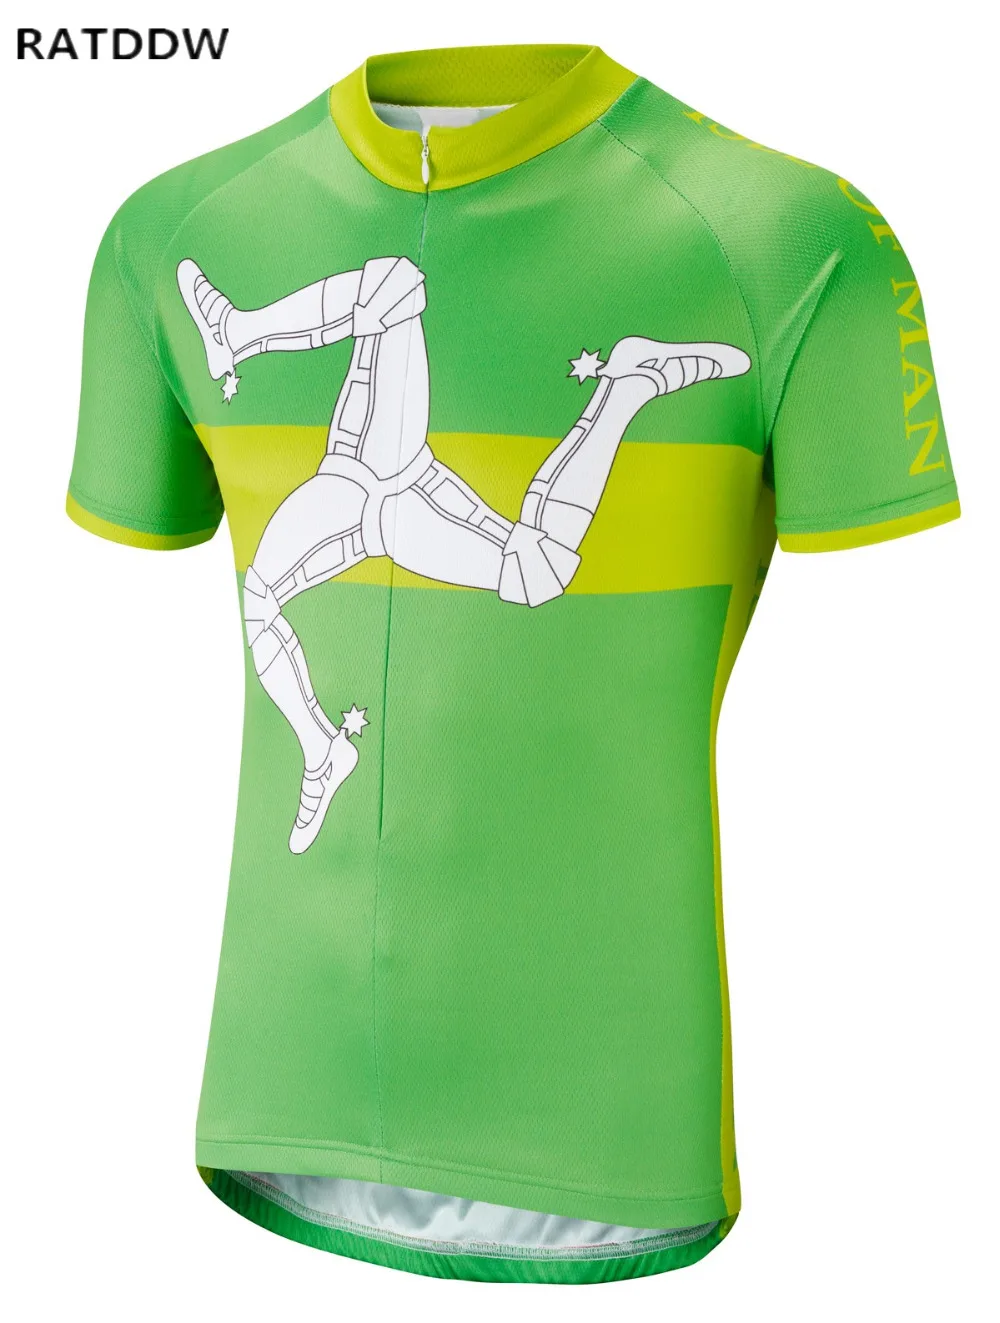 

Isle of Man Cycling Jersey Bike Bicicleta Jacket Bicycle Outdoor Sports Short Sleeves Shirt Ropa Ciclismo Clothing QuickDry